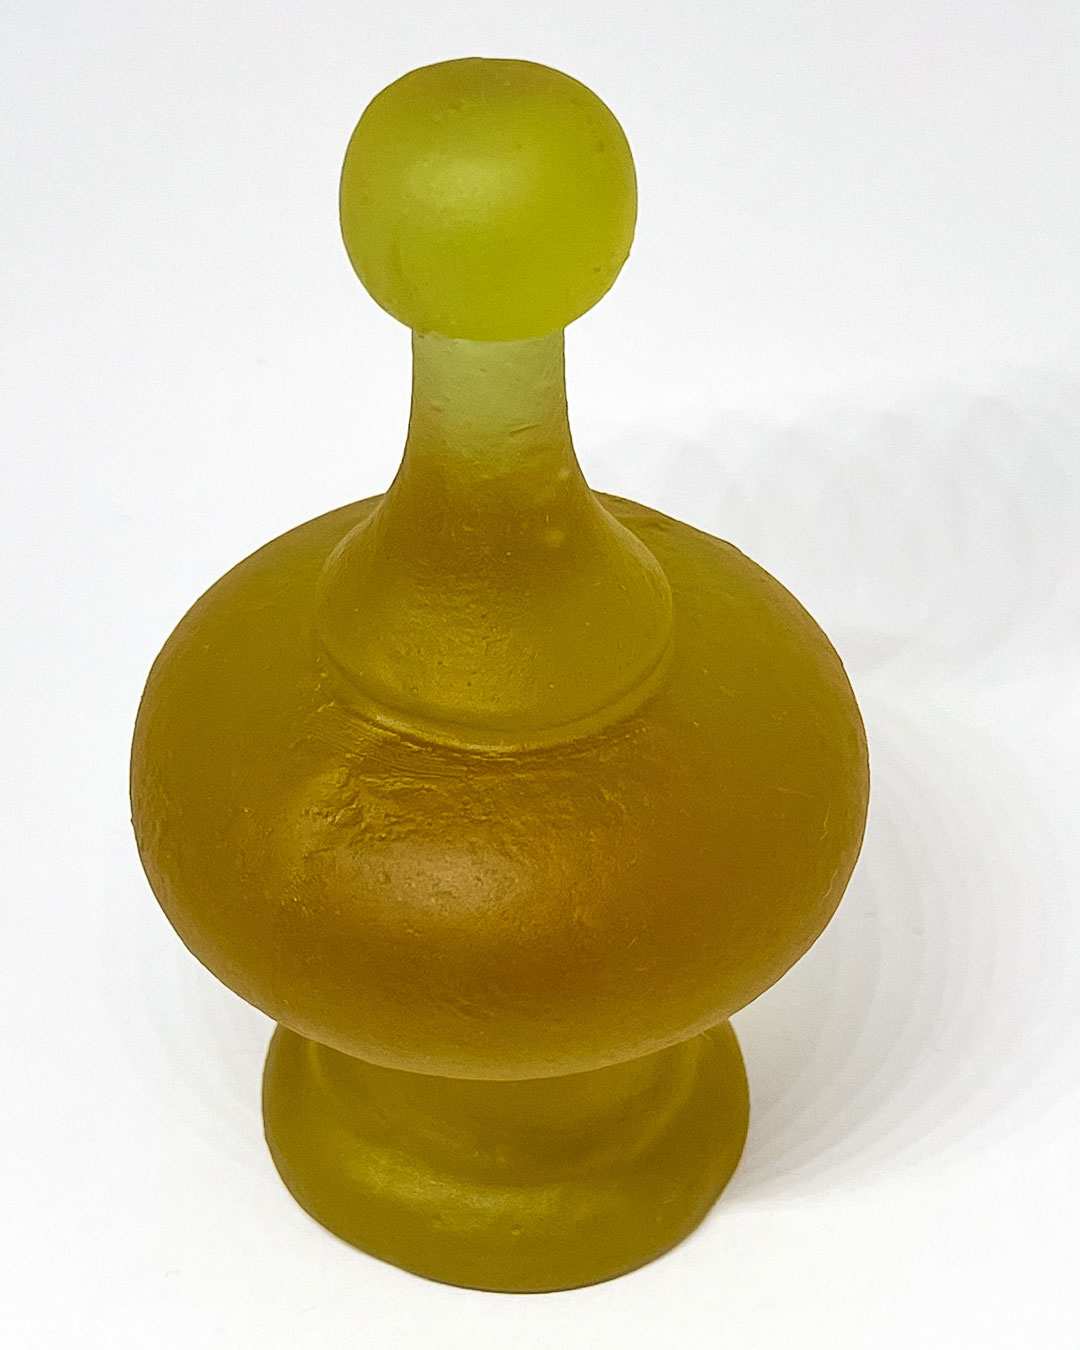 A top down view of a Rhubarb cast glass finial showing the green colour when lit